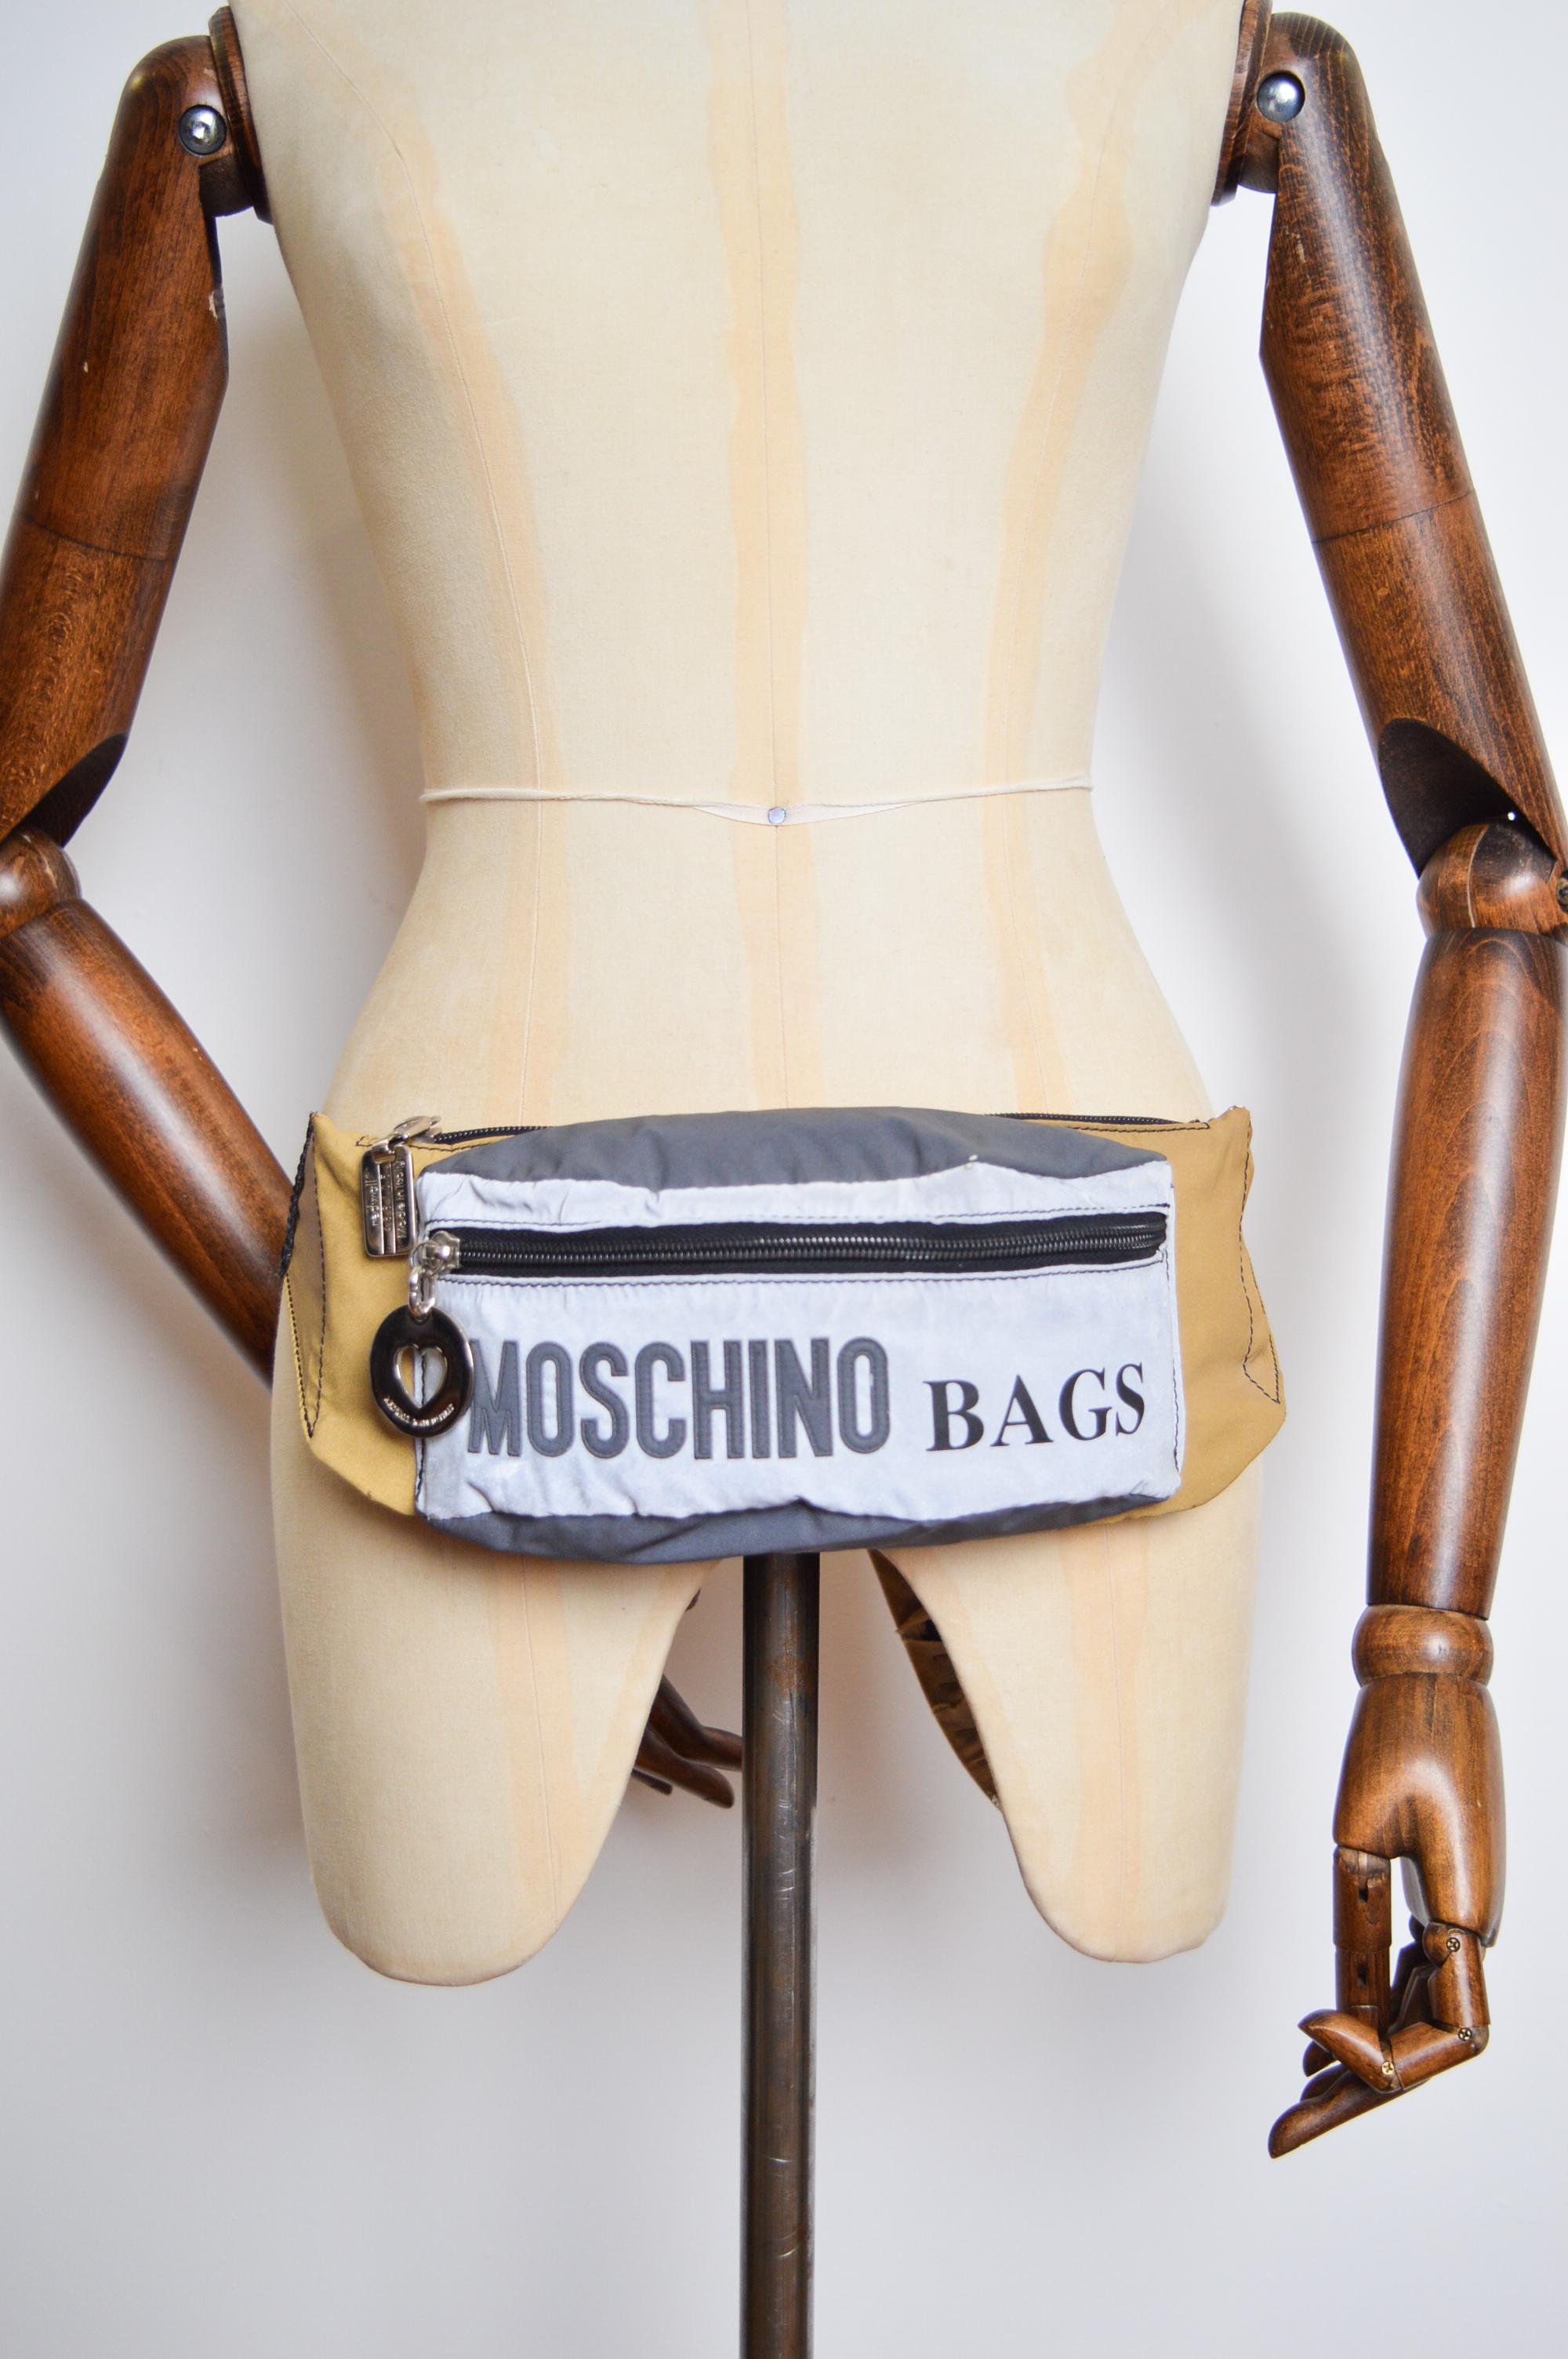 Early 1990's Vintage MOSCHINO Reflective Gold & Silver Bum Bag - Fanny Pack In Good Condition For Sale In Sheffield, GB